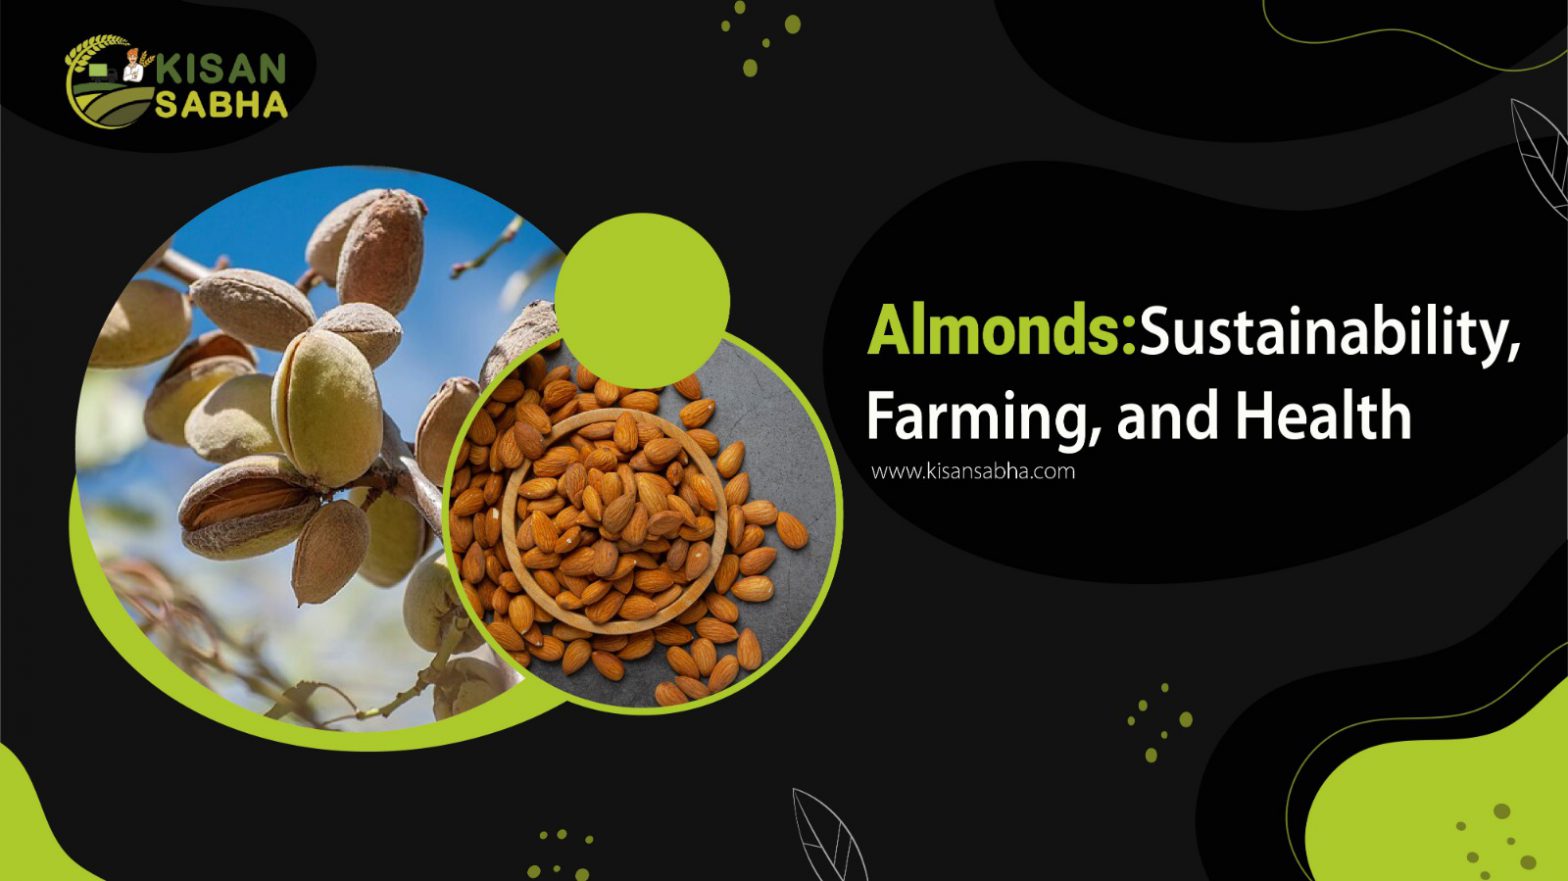 Almonds: Sustainability, Farming, and Health